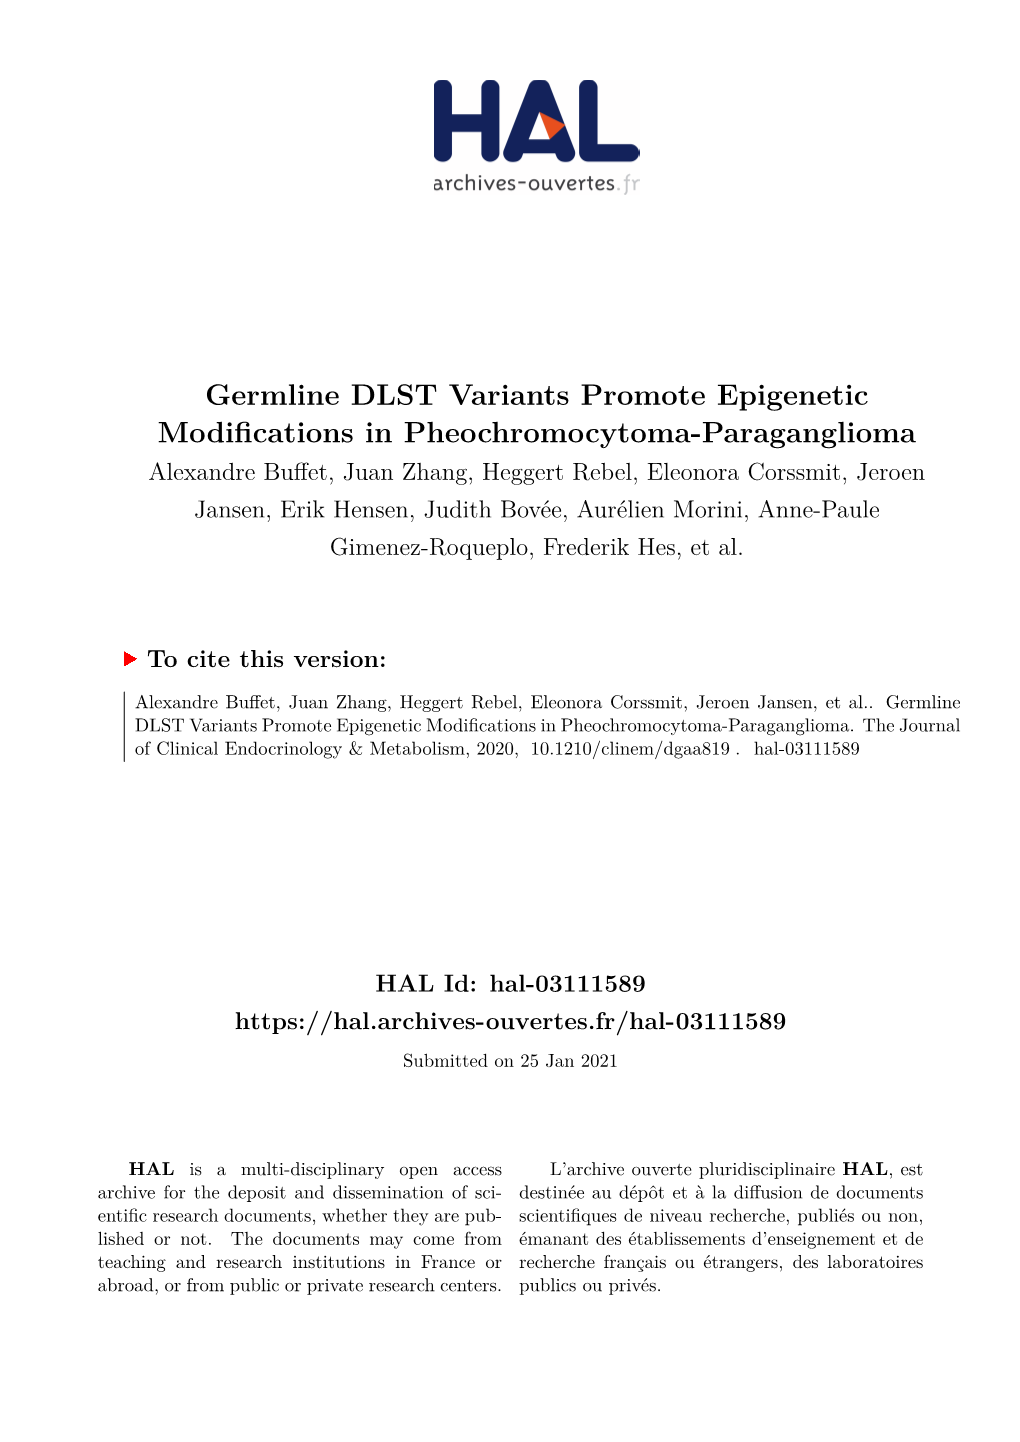 Germline DLST Variants Promote Epigenetic Modifications in Pheochromocytoma-Paraganglioma